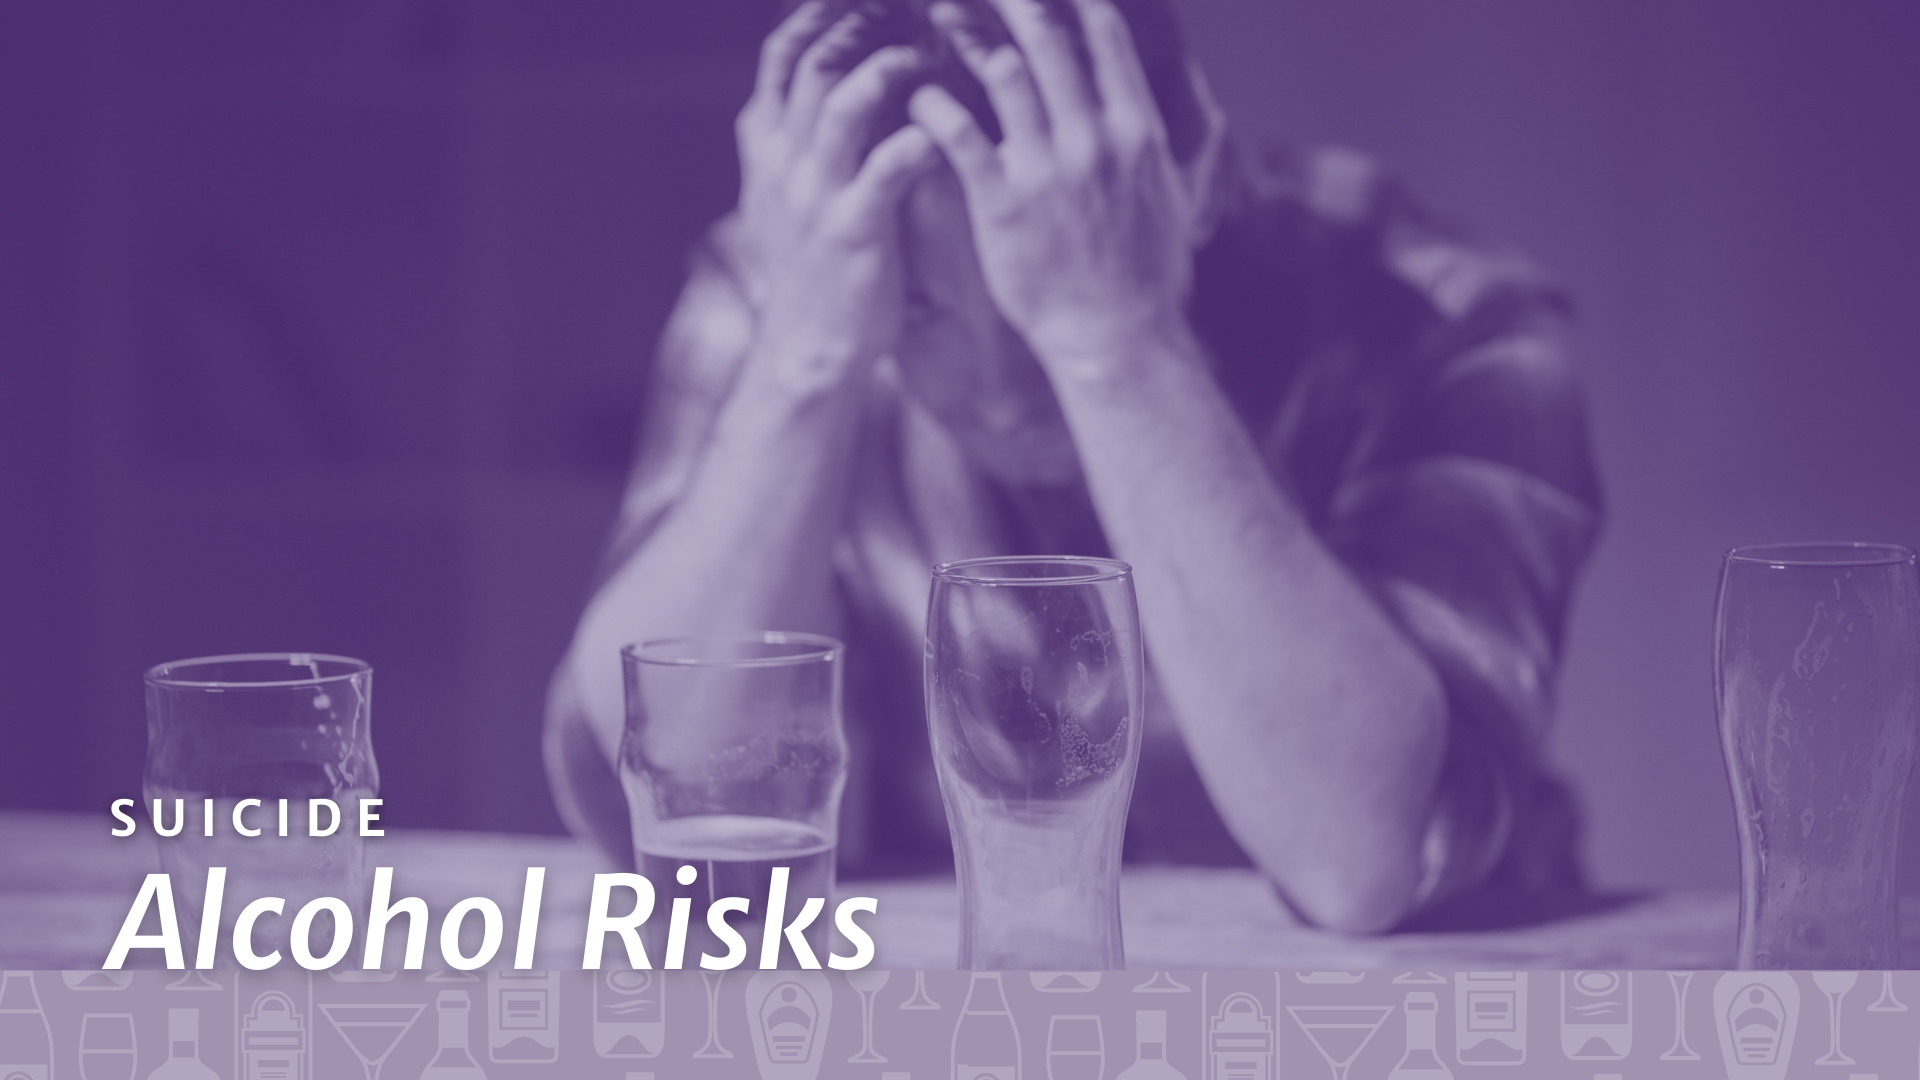 Does alcohol and other drug abuse increase the risk for suicide?